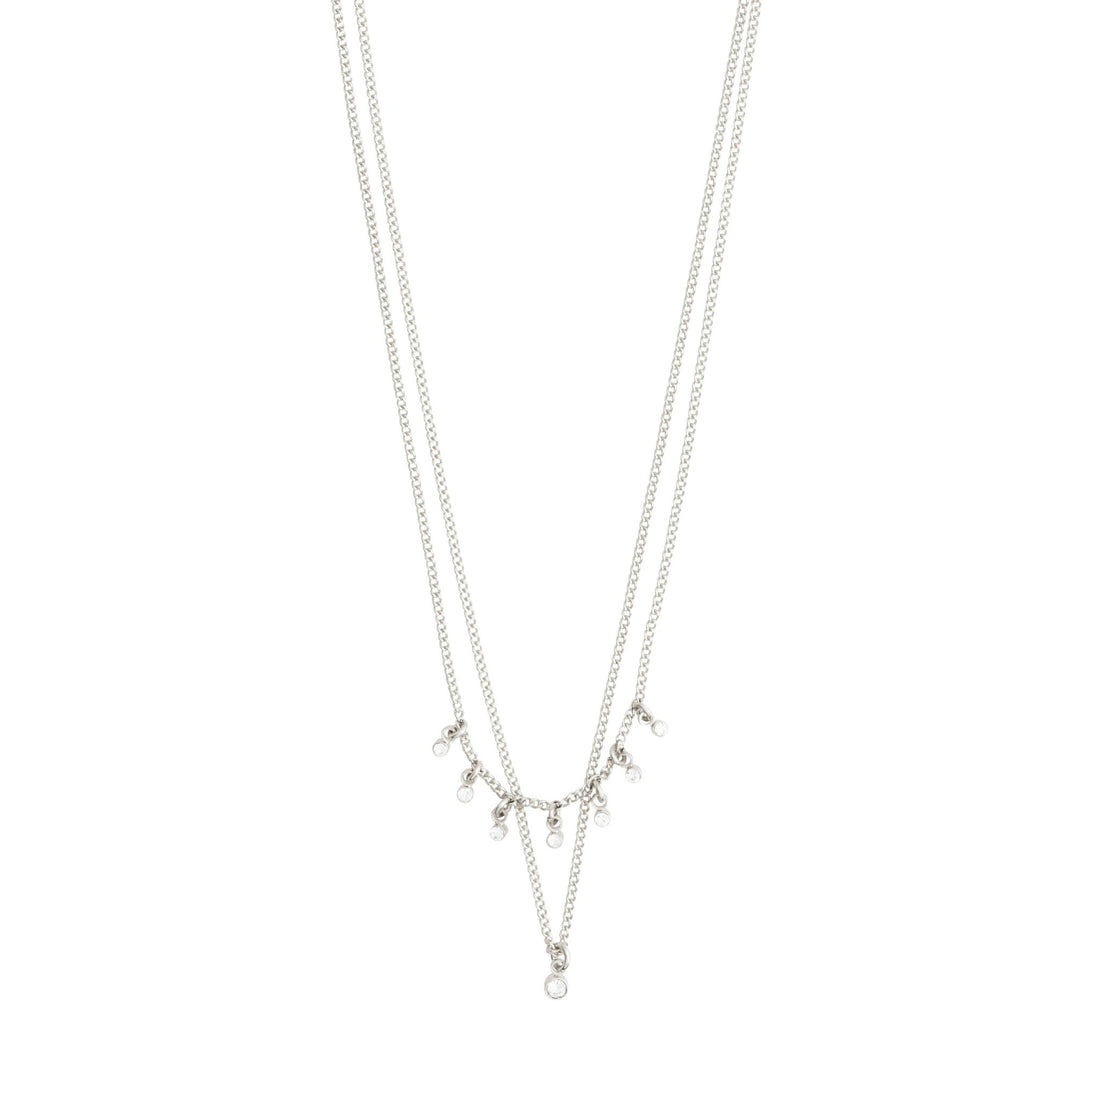 Sia Recycled Crystal 2-in-1 Chain - PILGRIM